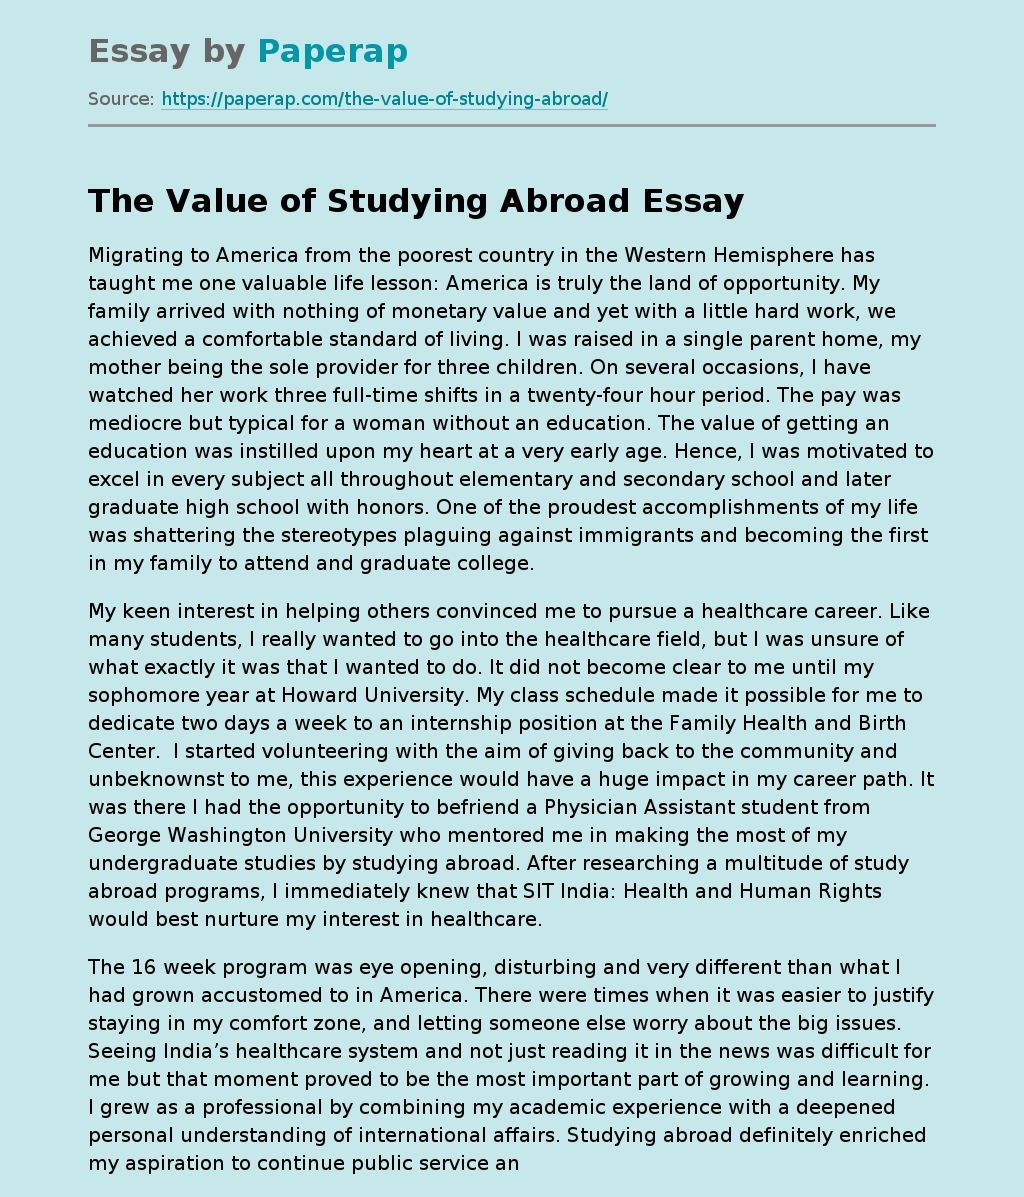 going abroad essay